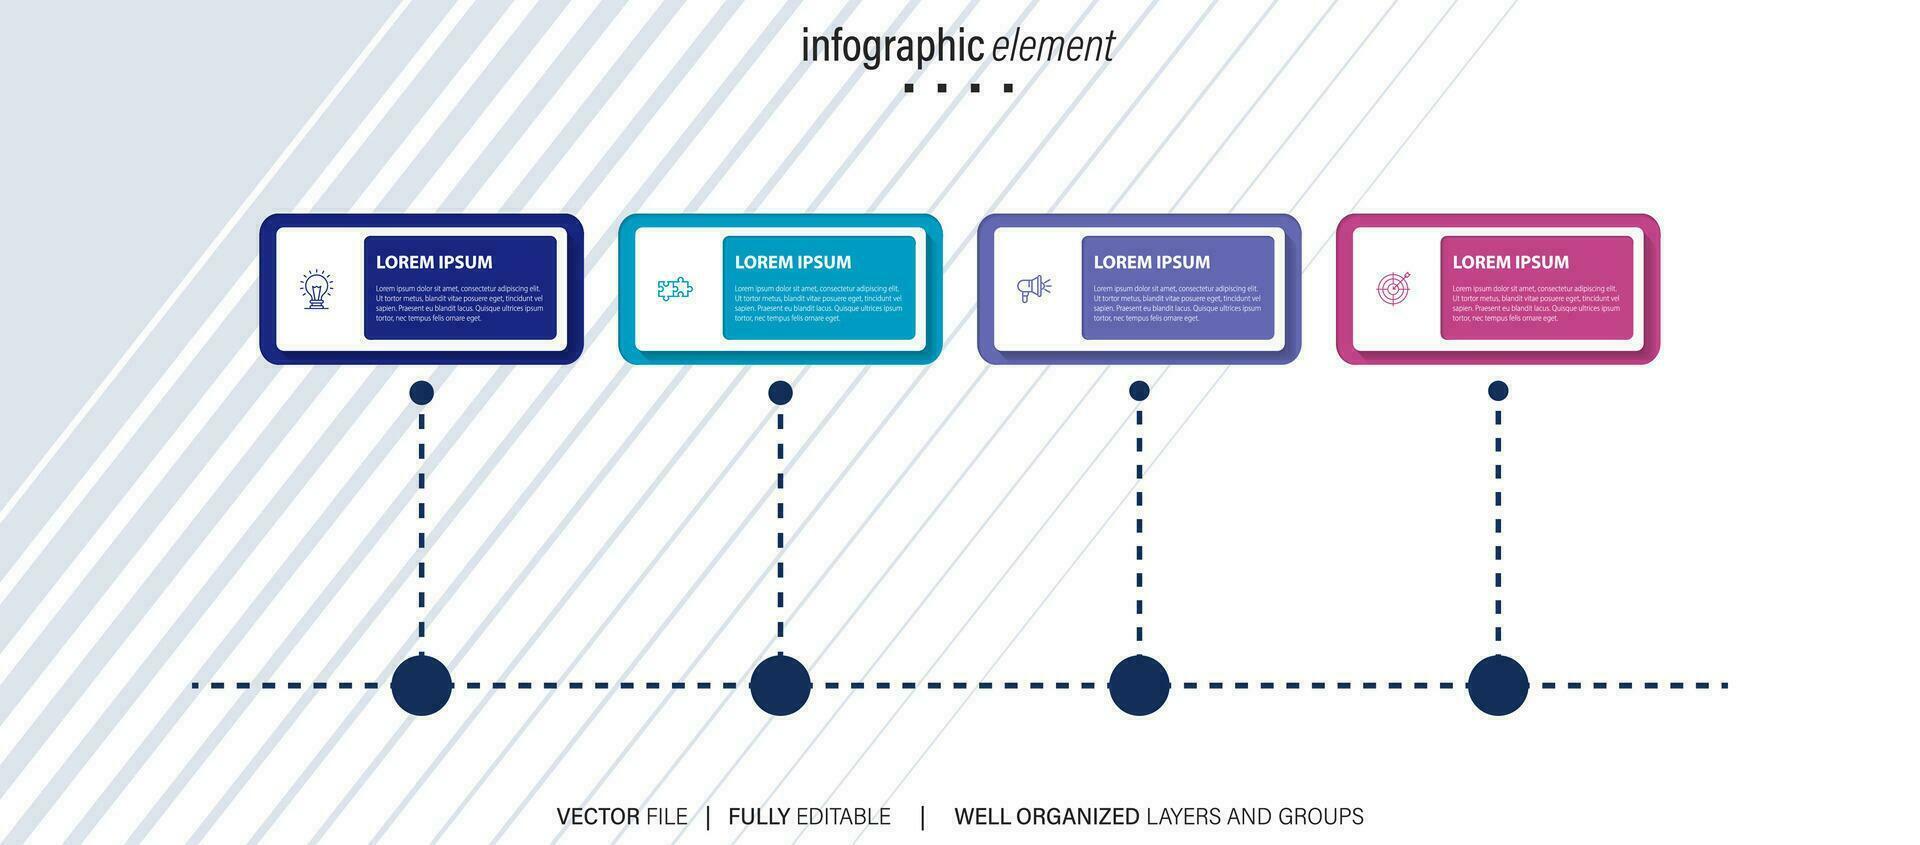 Infographic design template. Timeline concept with 4 steps vector